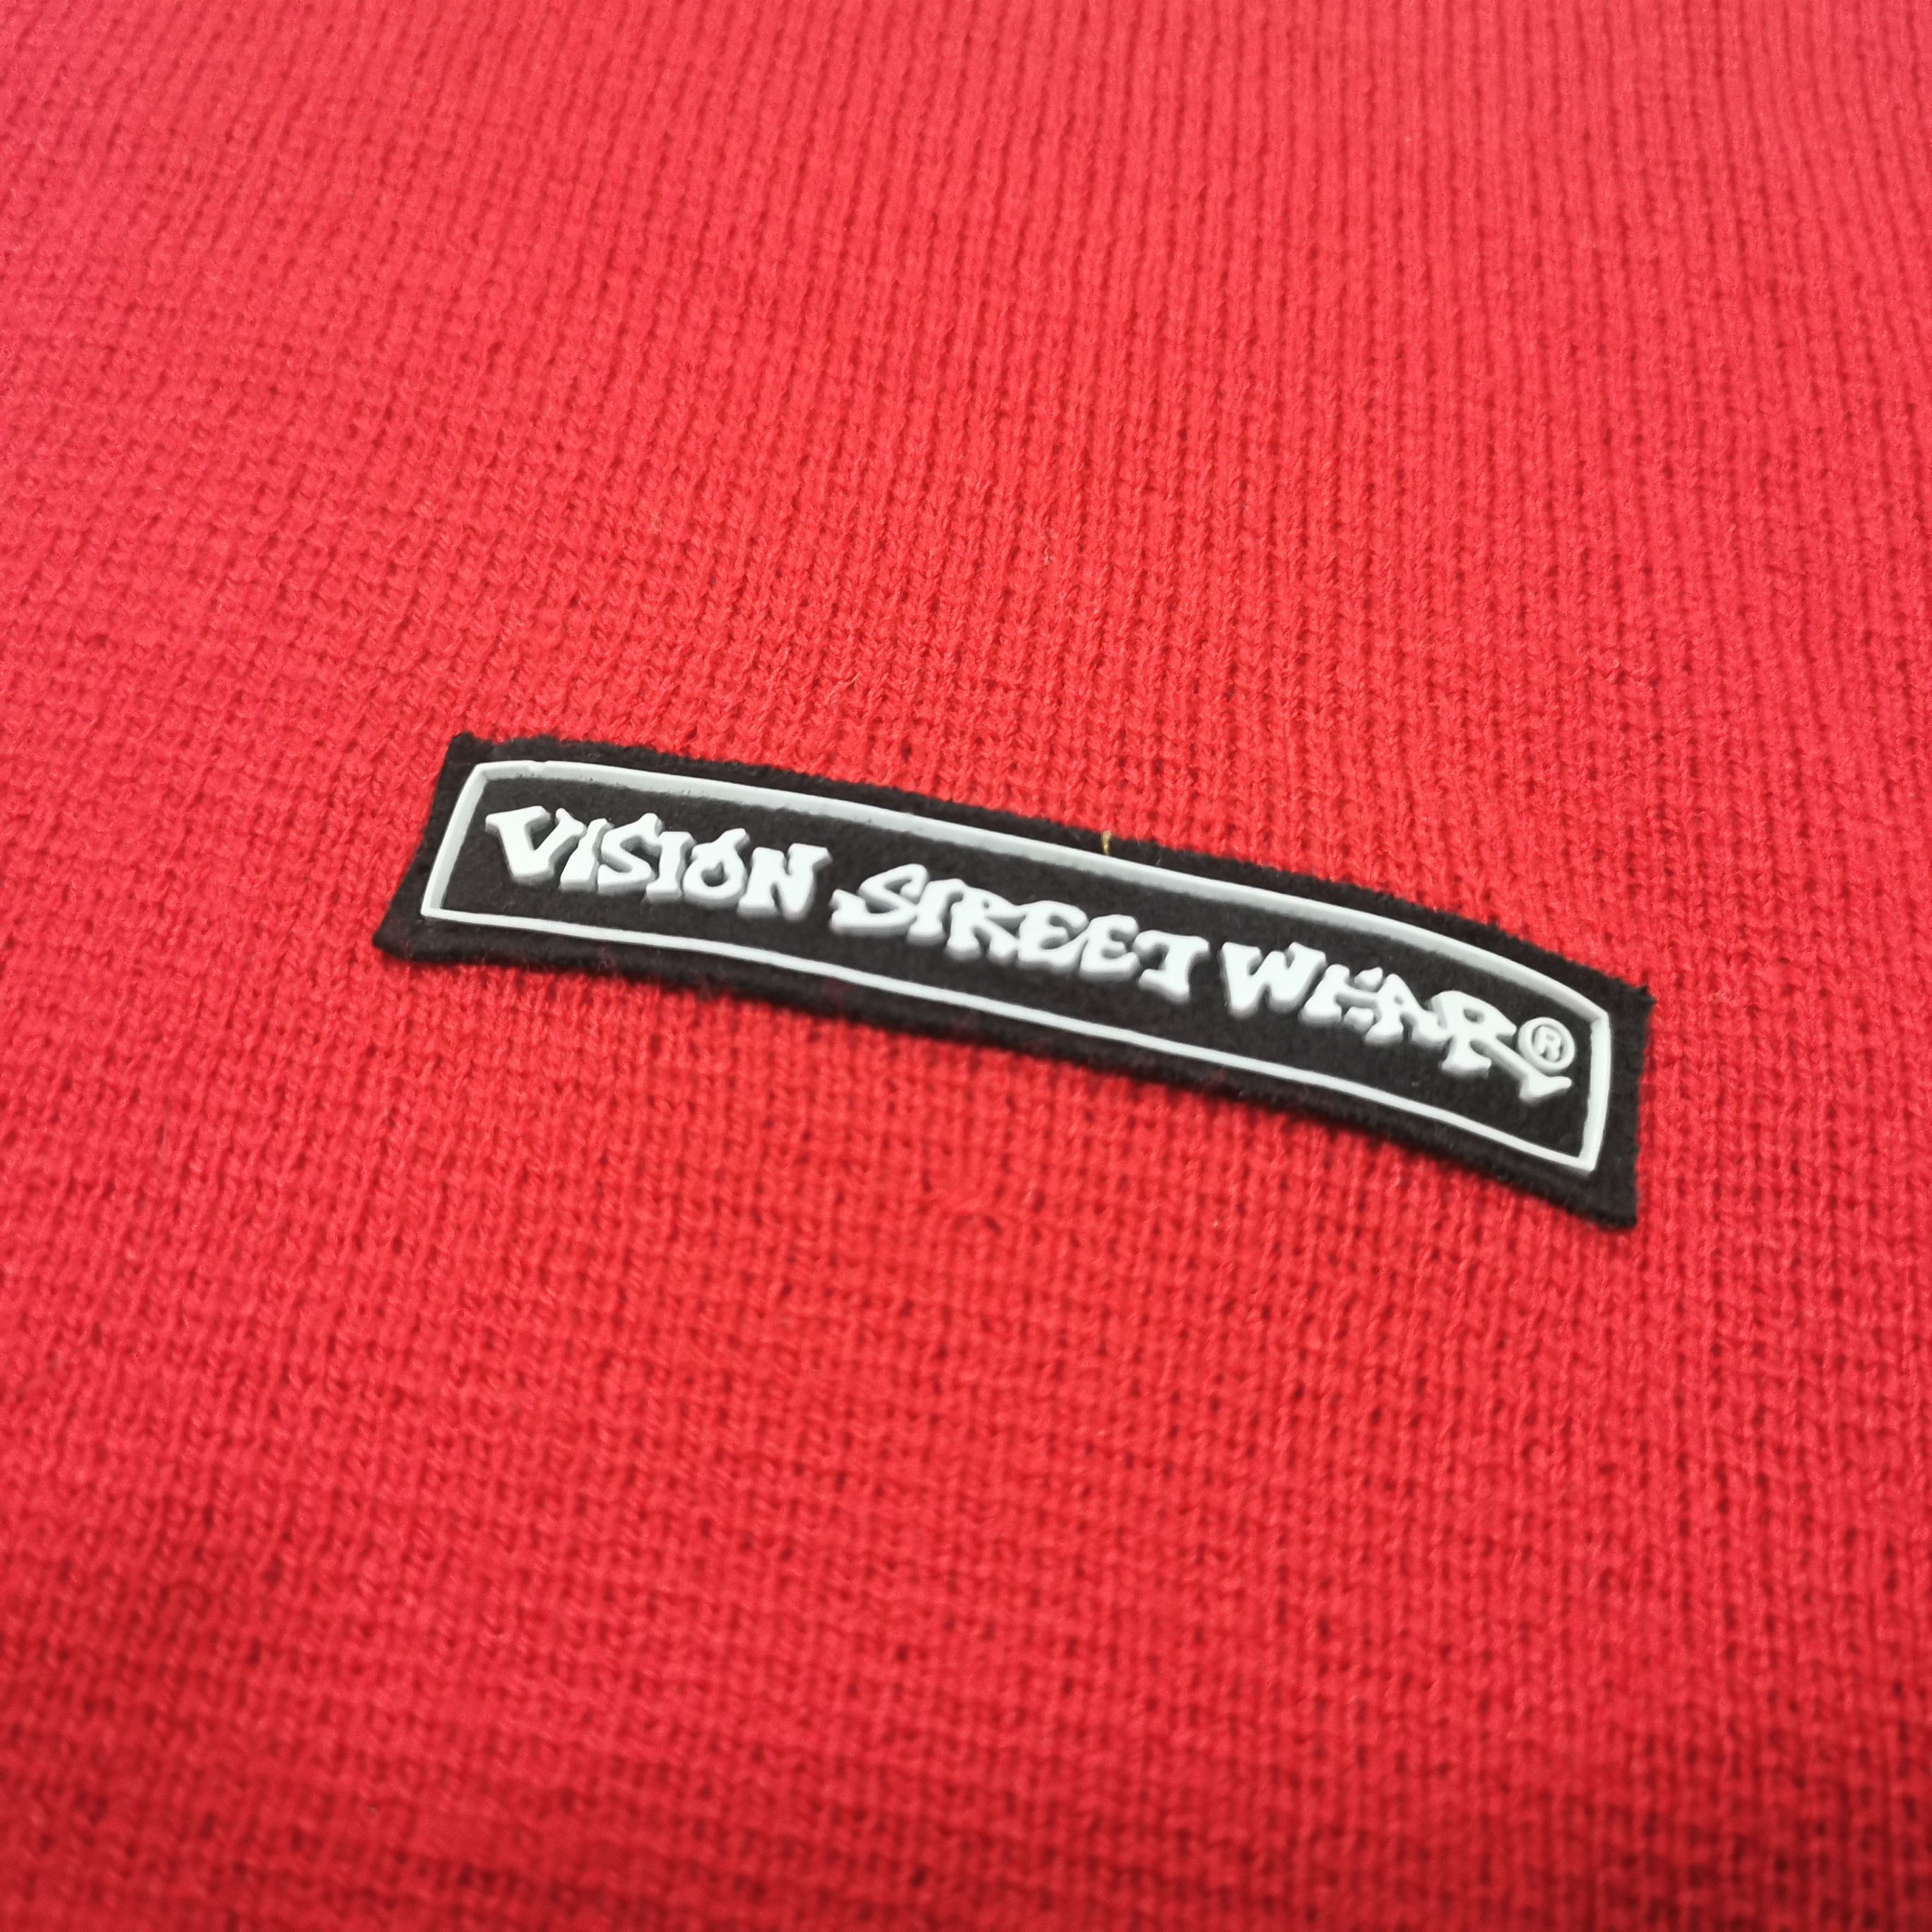 Vintage Vision Street Wear Knitted Sweaters - 3